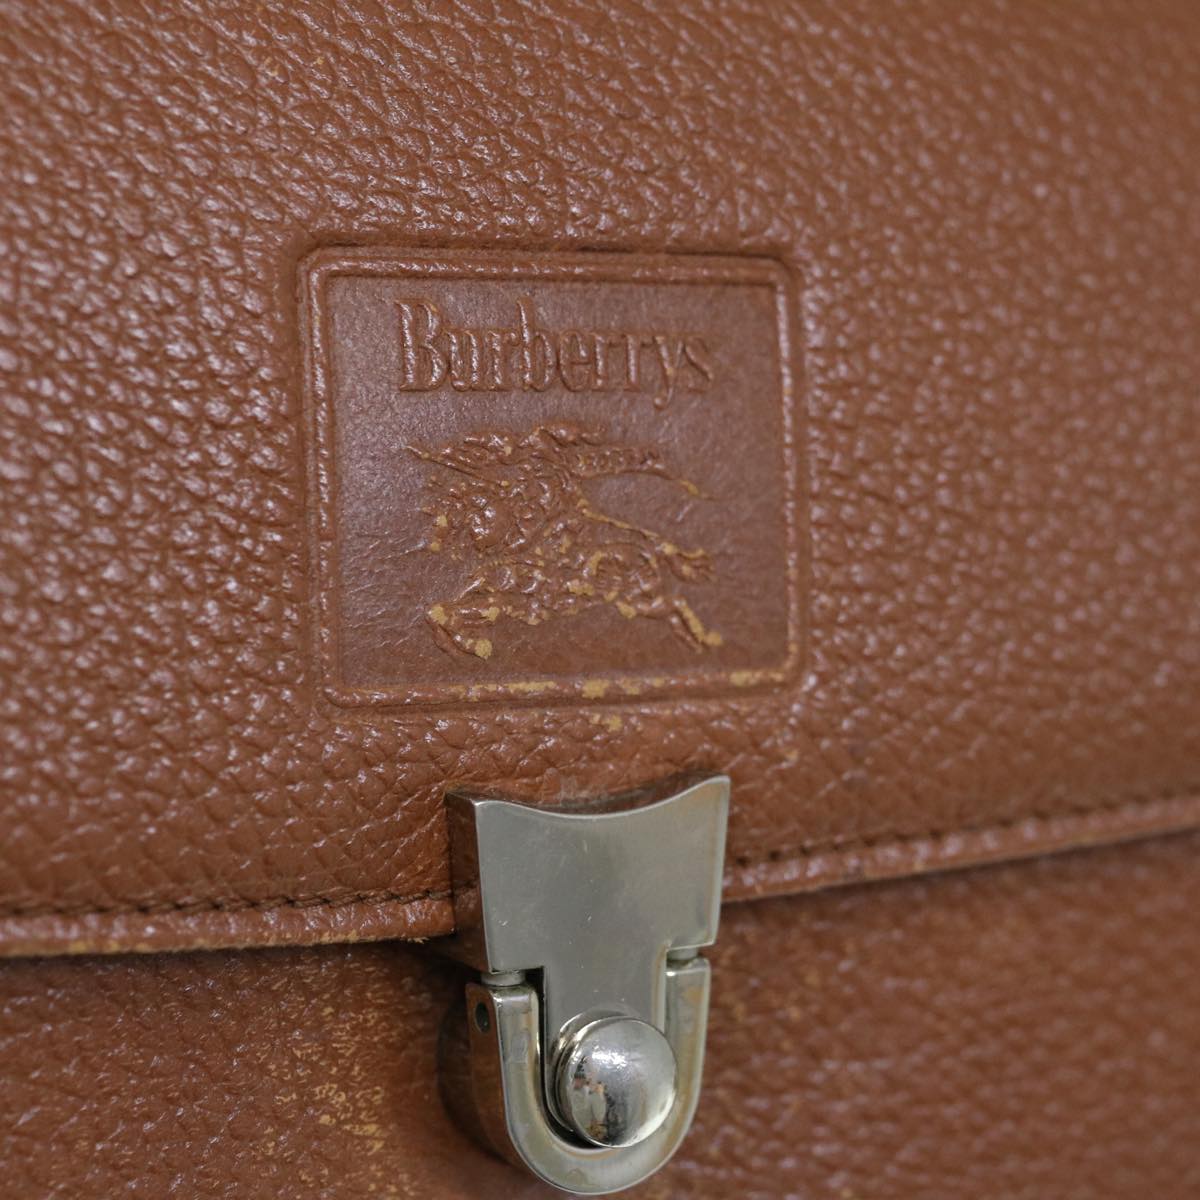 Burberrys Hand Bag Leather Brown Auth 65773